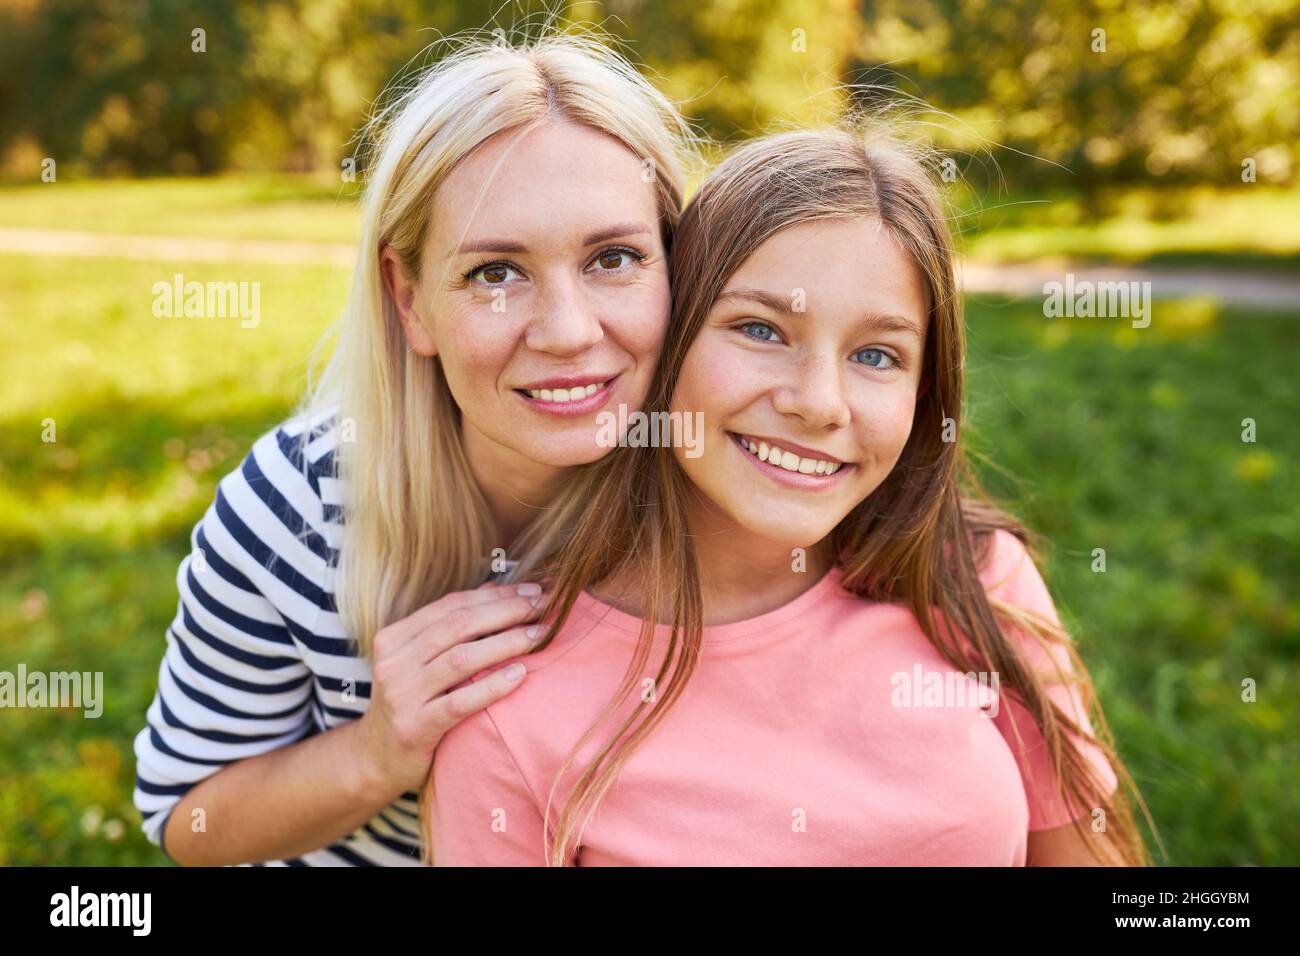 Single mother and daughter together in nature in summer Stock Photo